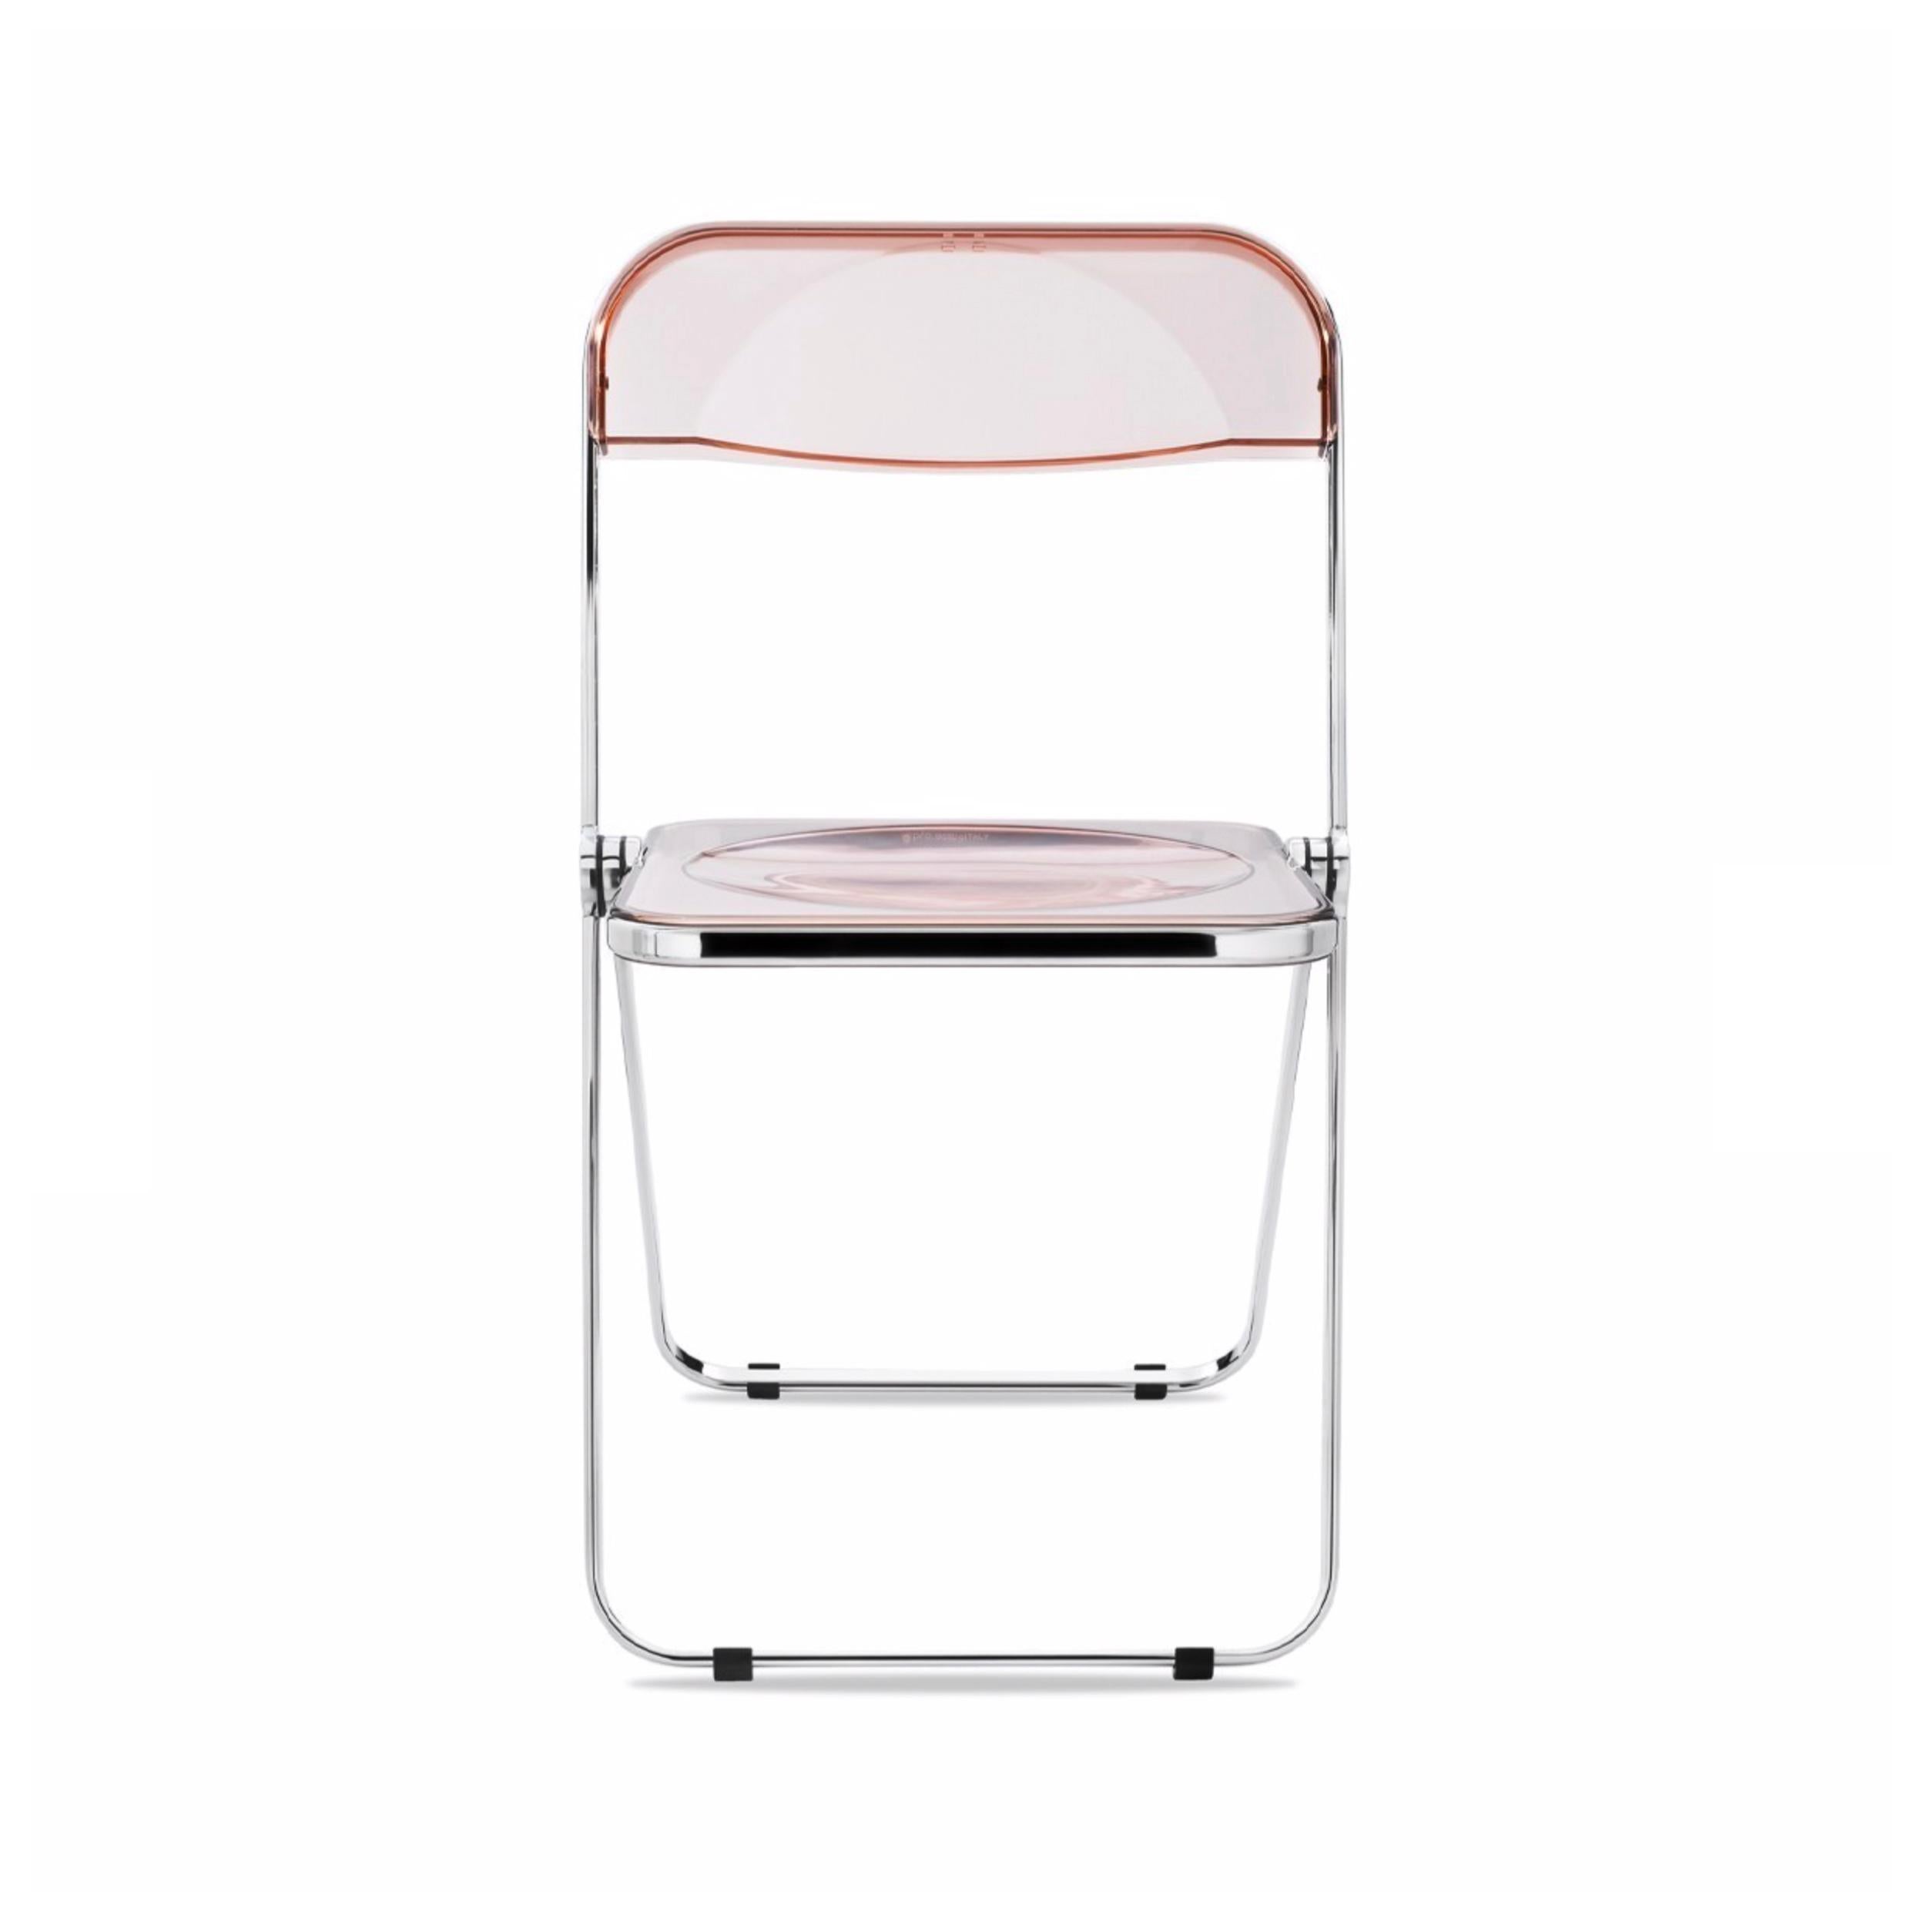 Steel Set of 12 Lucite Pink and Chrome Plia Chairs, Piretti for Castelli, Italy 1970s For Sale